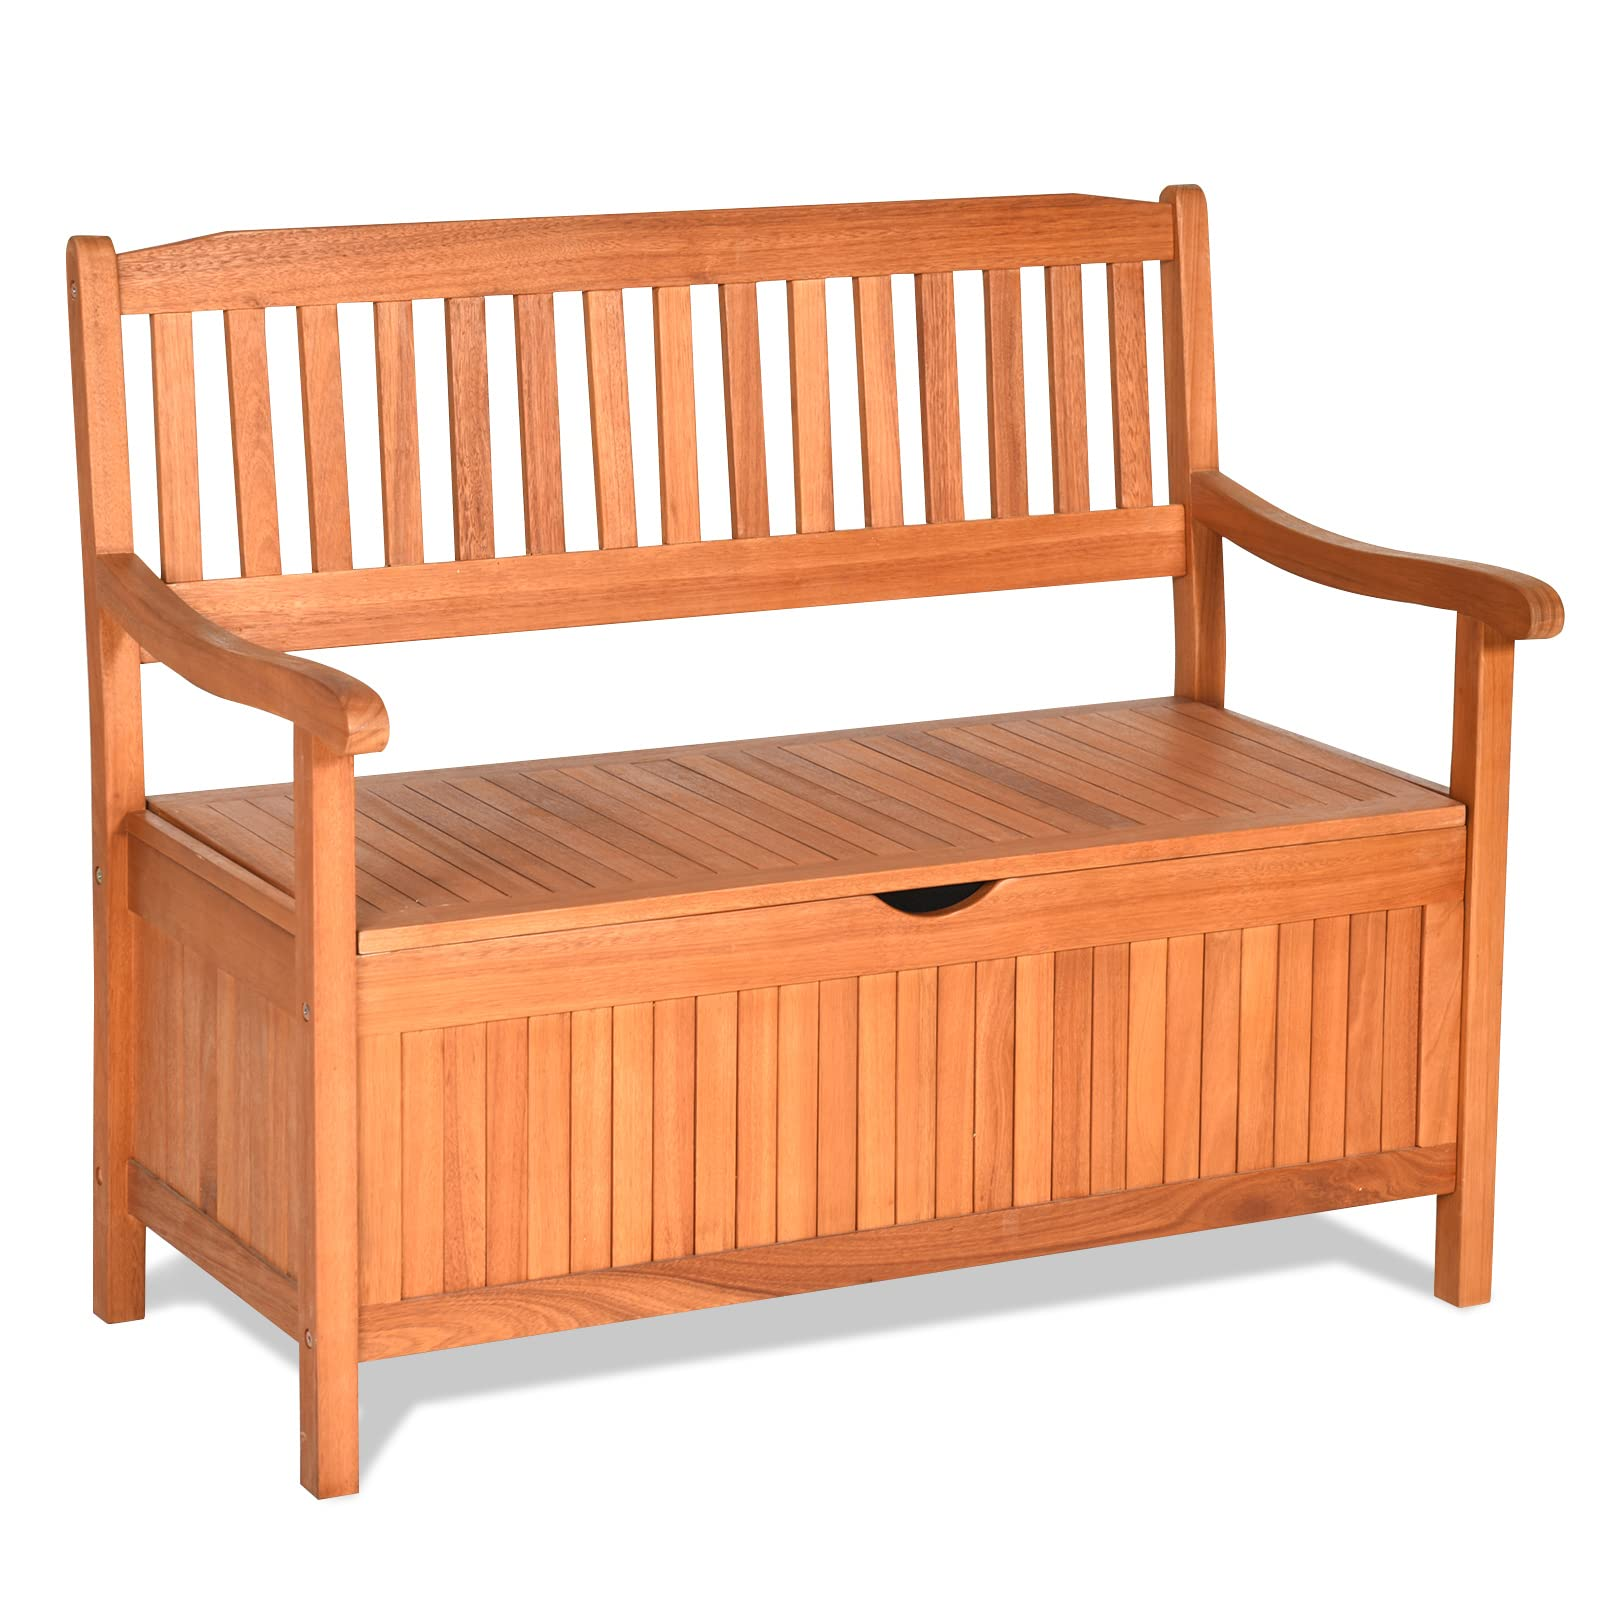 Giantex Patio Bench with Storage, Outdoor Deck Box with Seating for Pool Front Porch Garden Lawn Decor